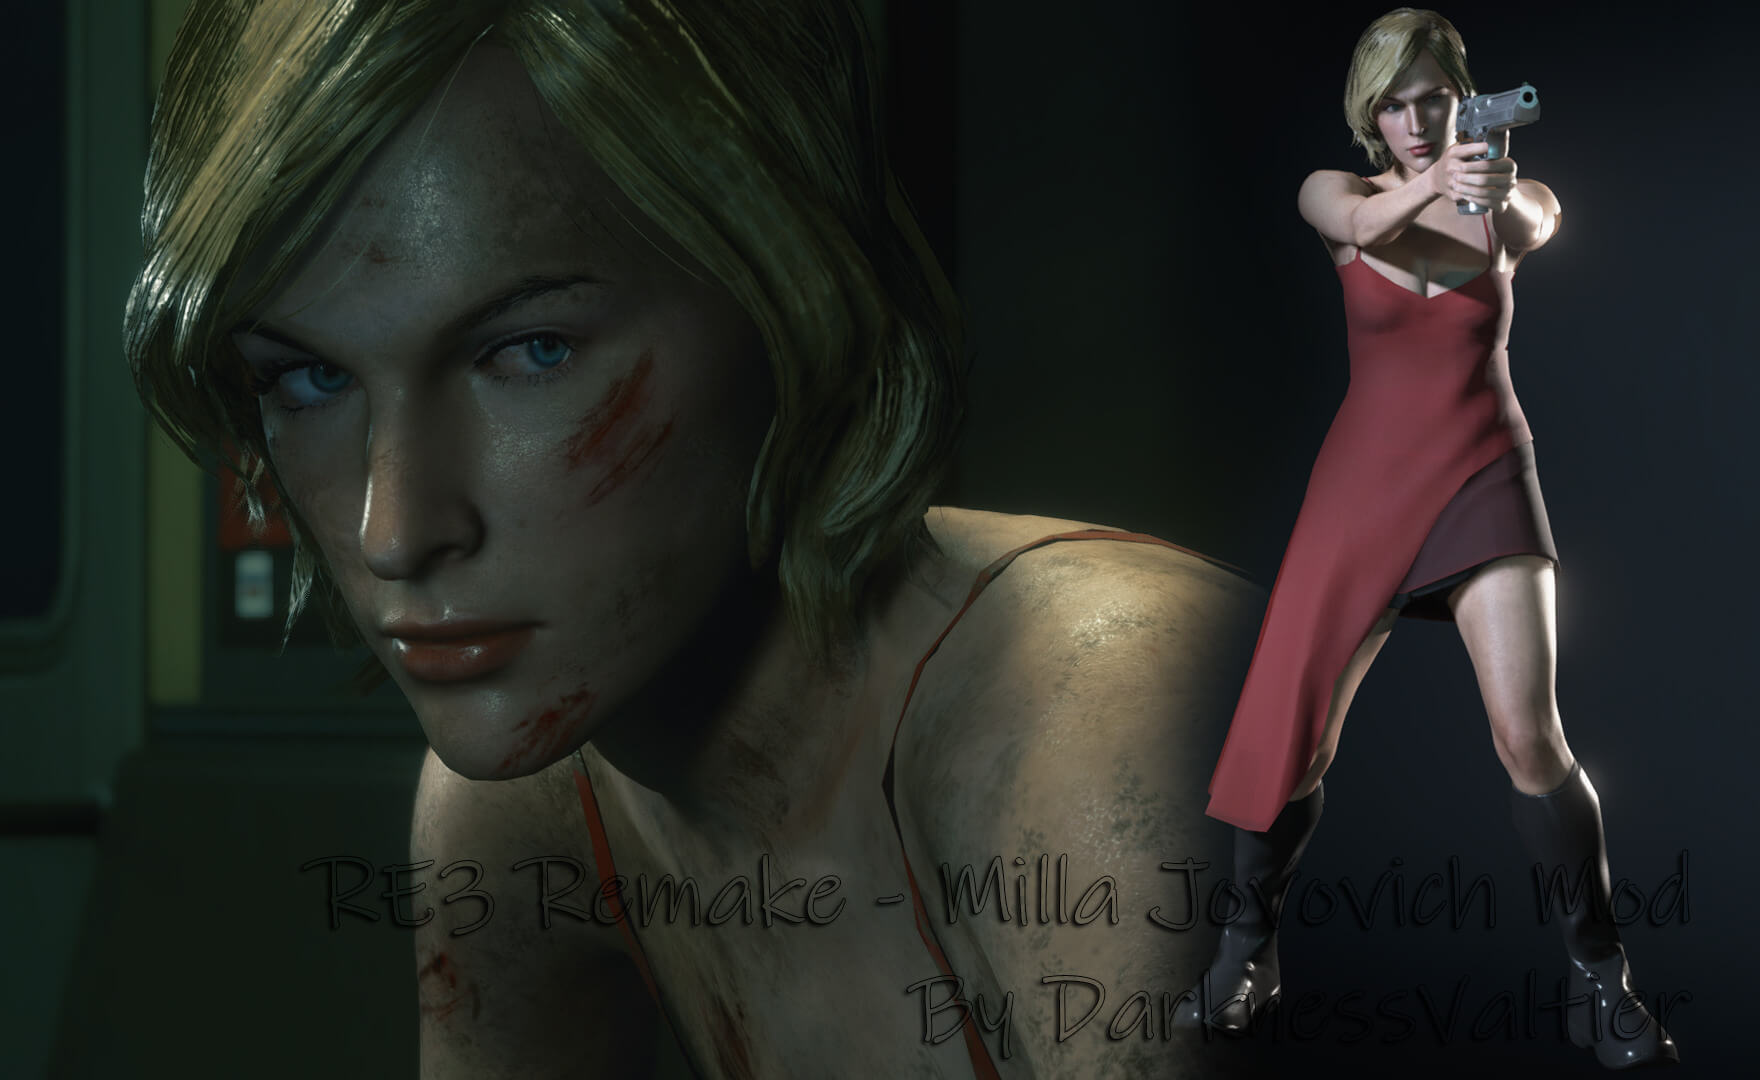 Would a Resident Evil Nemesis Remake Work?